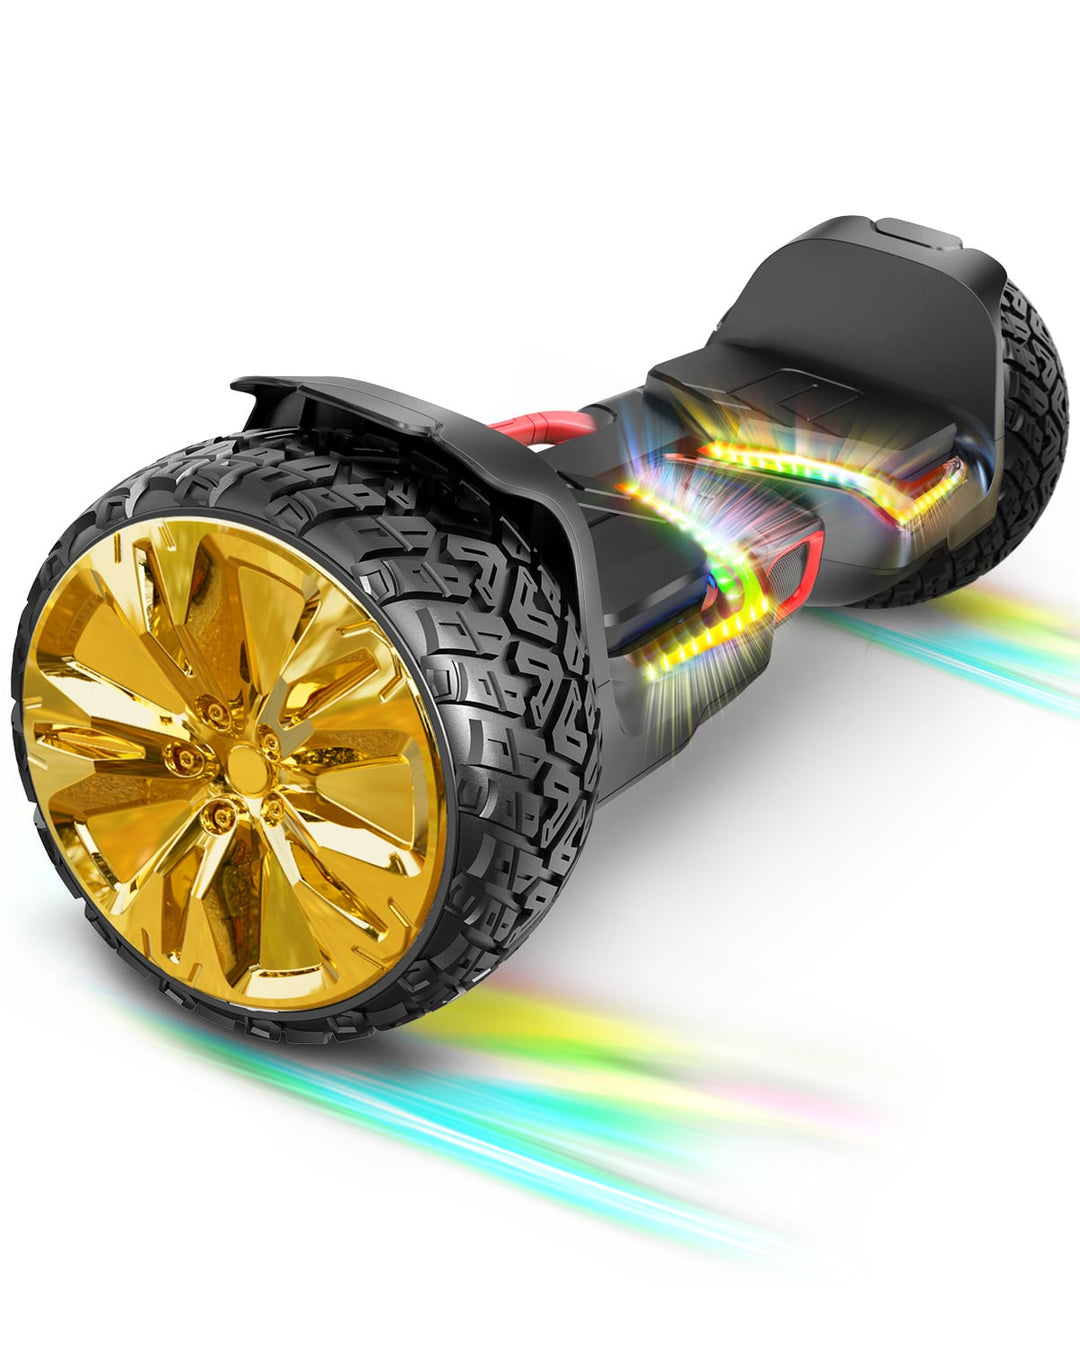 Gyroor Y1 Pro off road all terrain hoverboard for adults